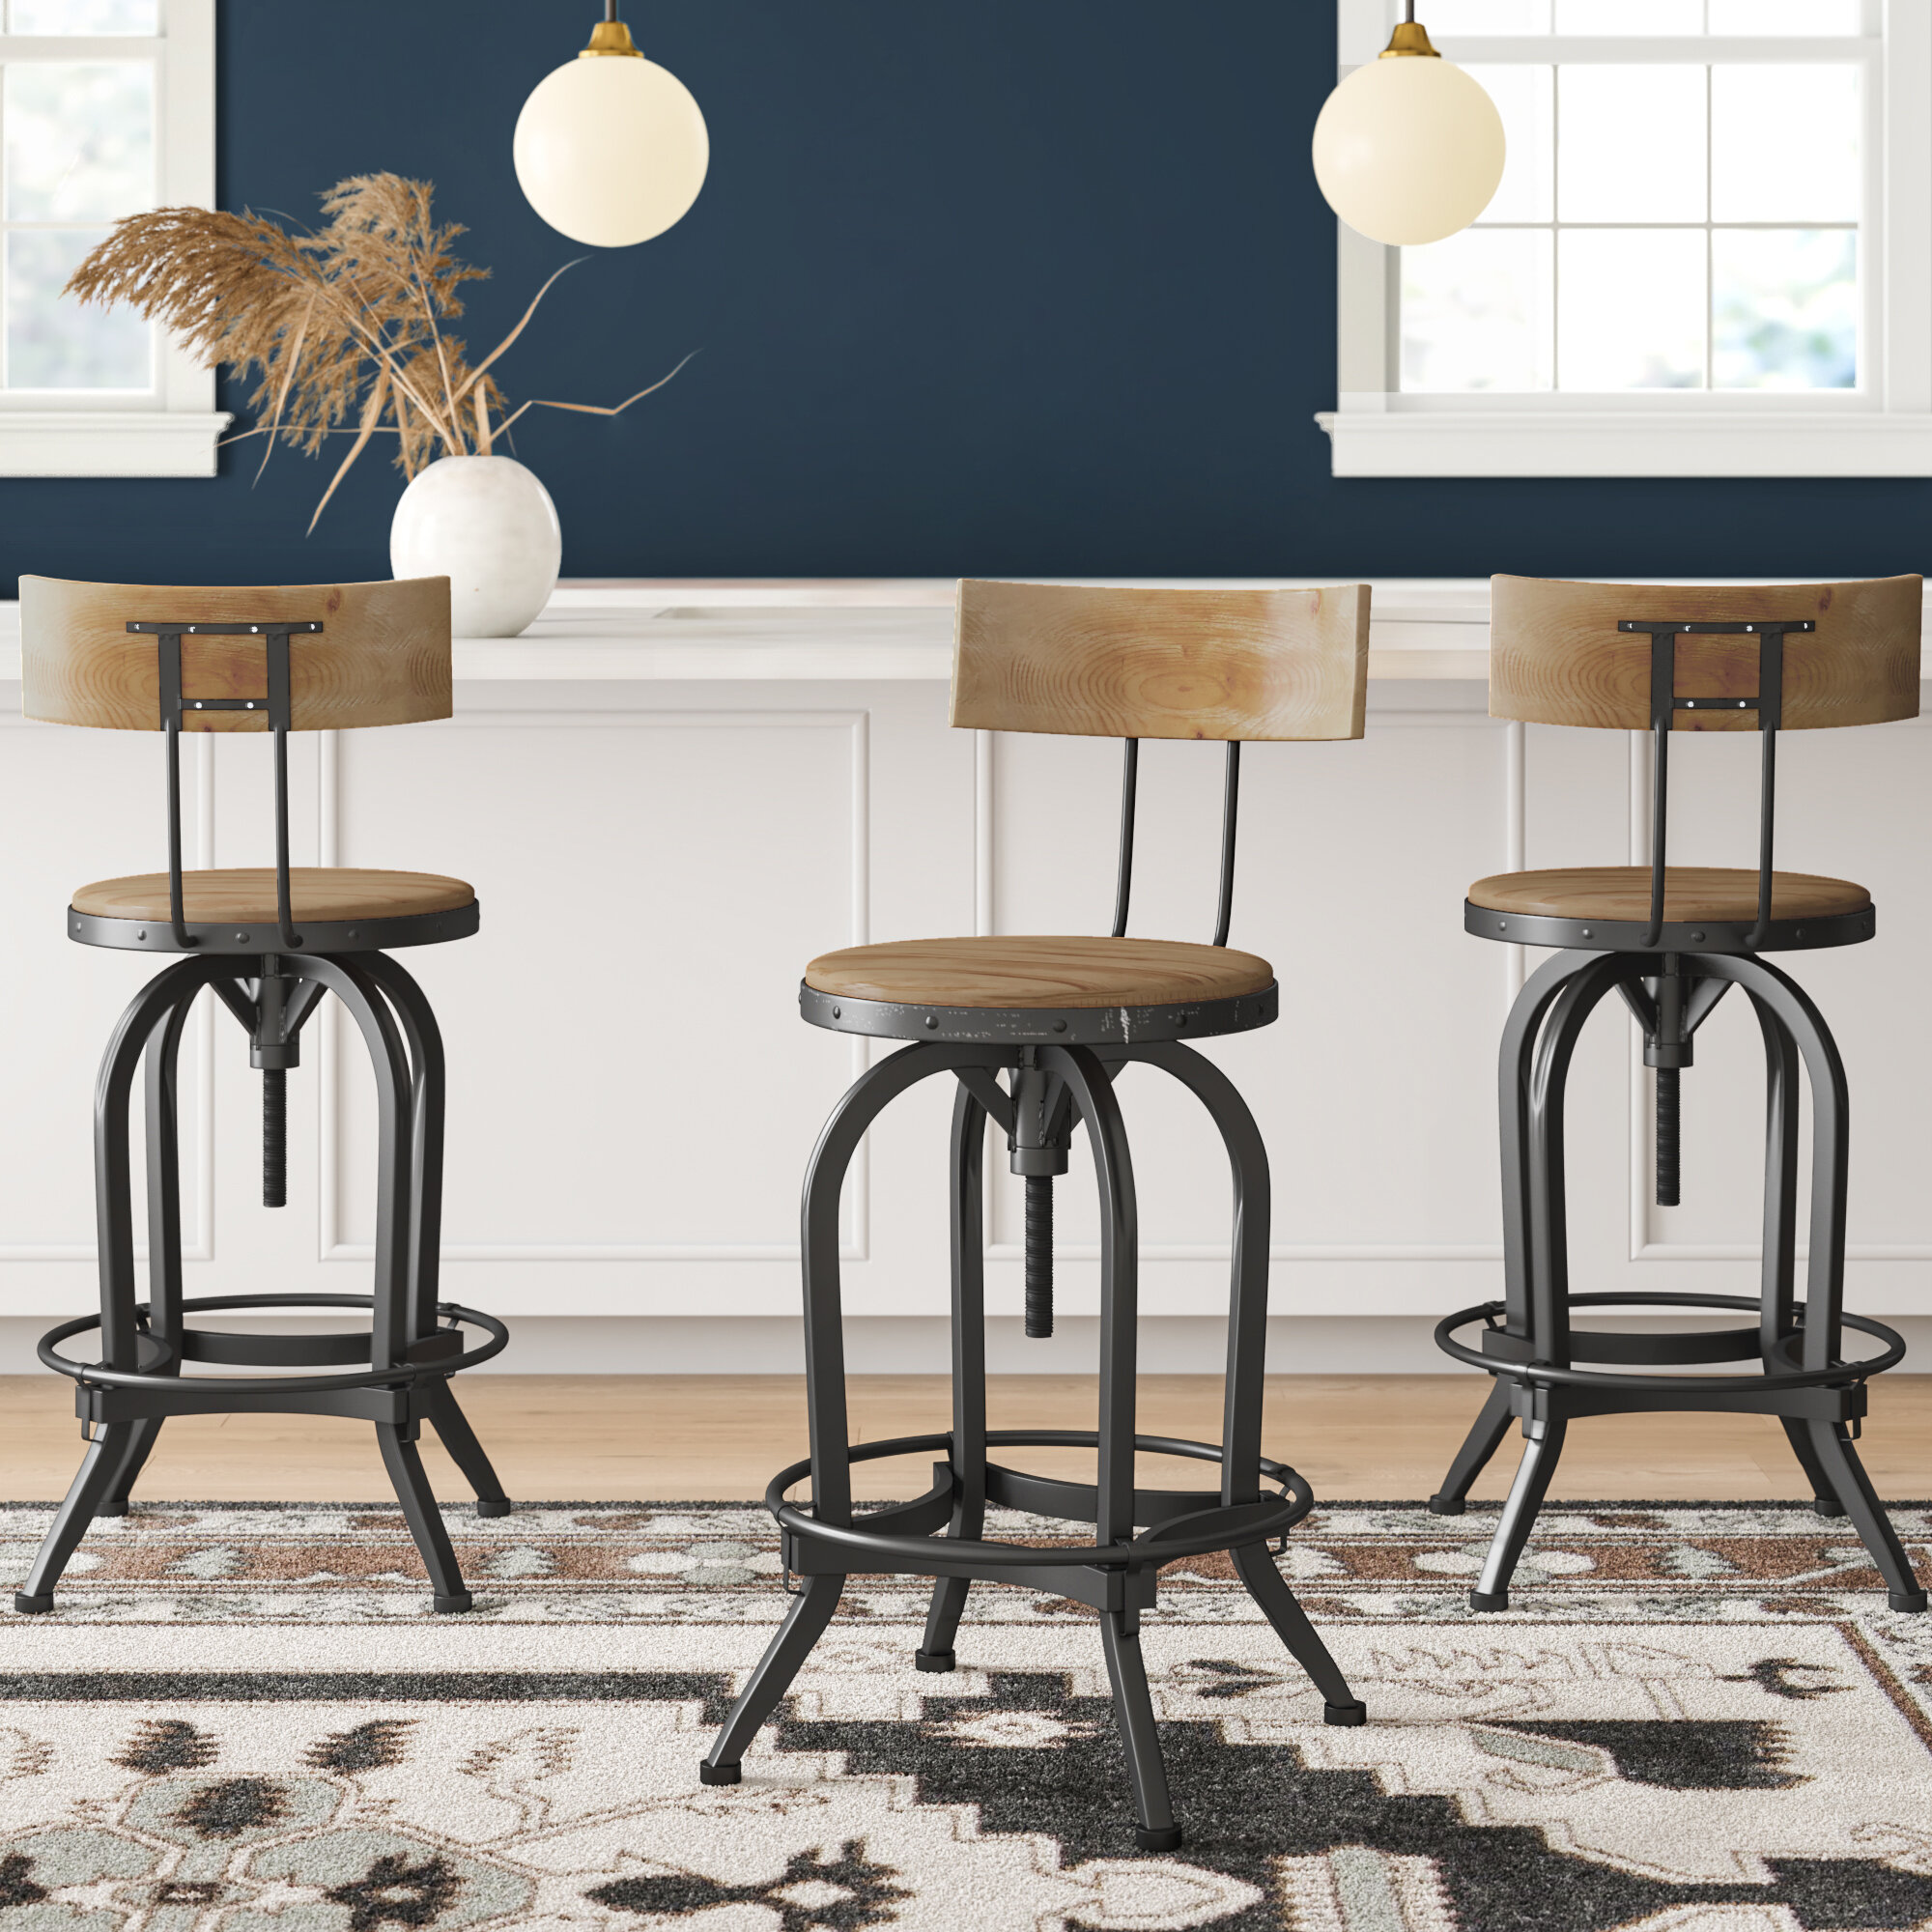 Best Medium Height Bar Stools of the decade The ultimate guide 